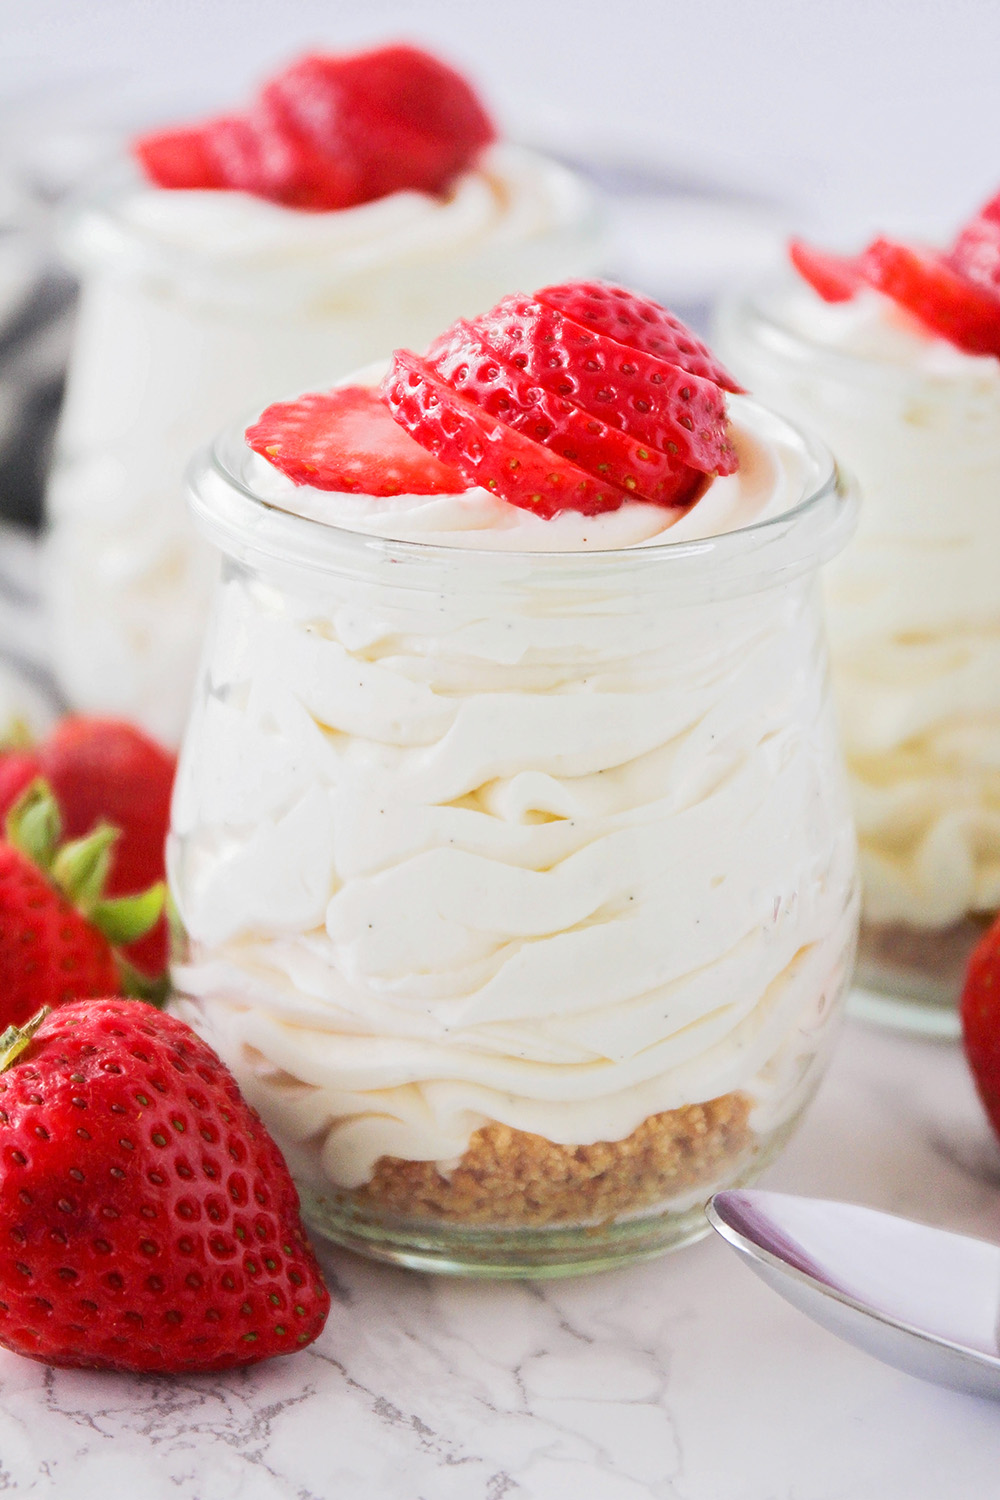 This homemade vanilla cheesecake mousse is so luscious and silky smooth. All the taste of cheesecake, without any of the work!